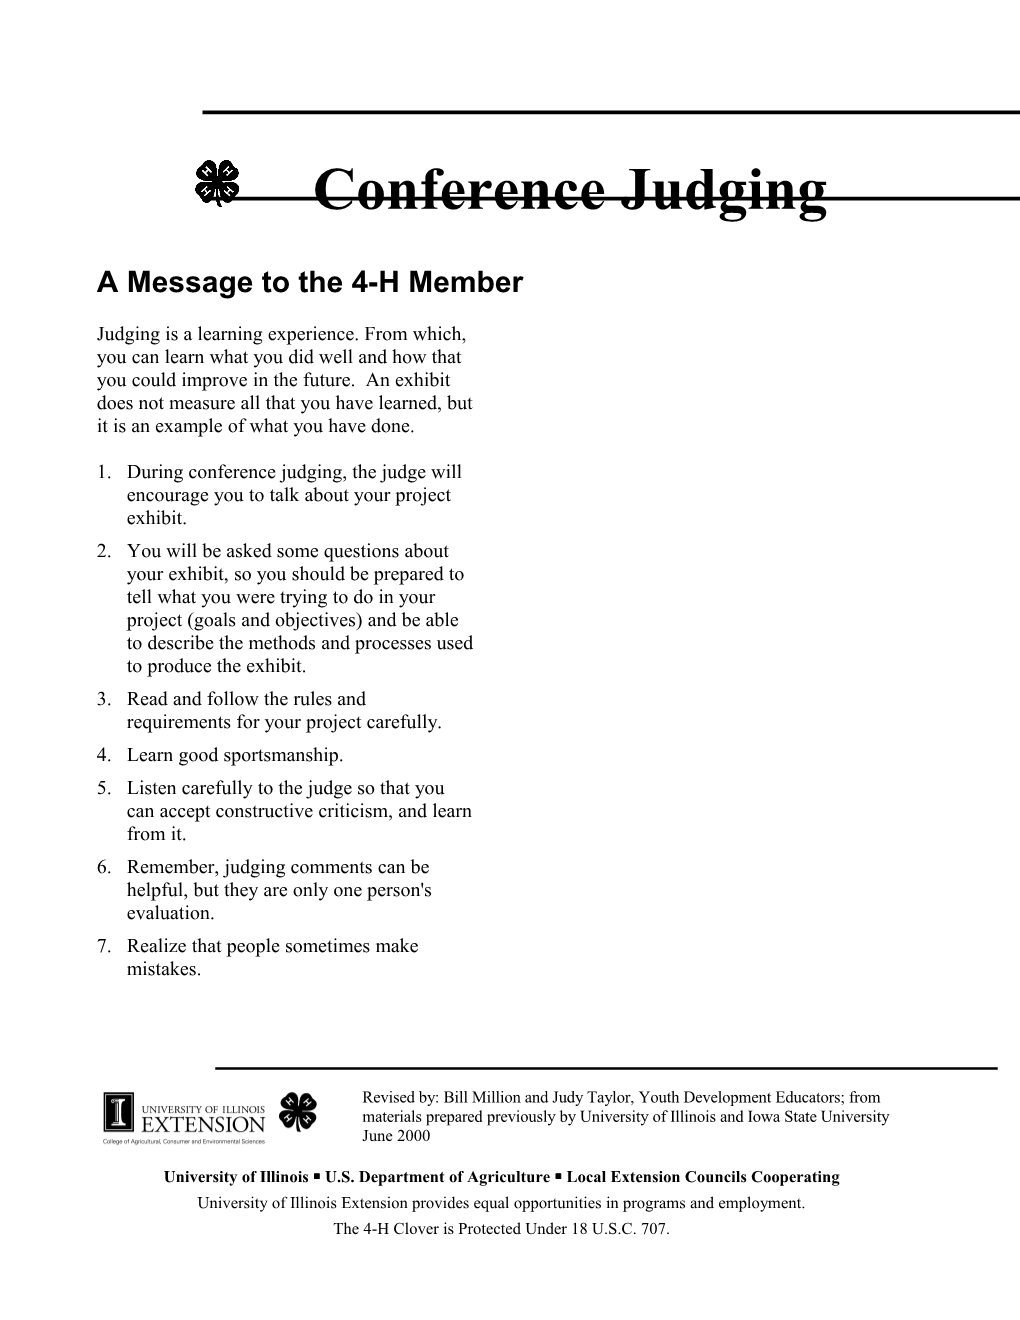 1. During Conference Judging, the Judge Will Encourage You to Talk About Your Project Exhibit